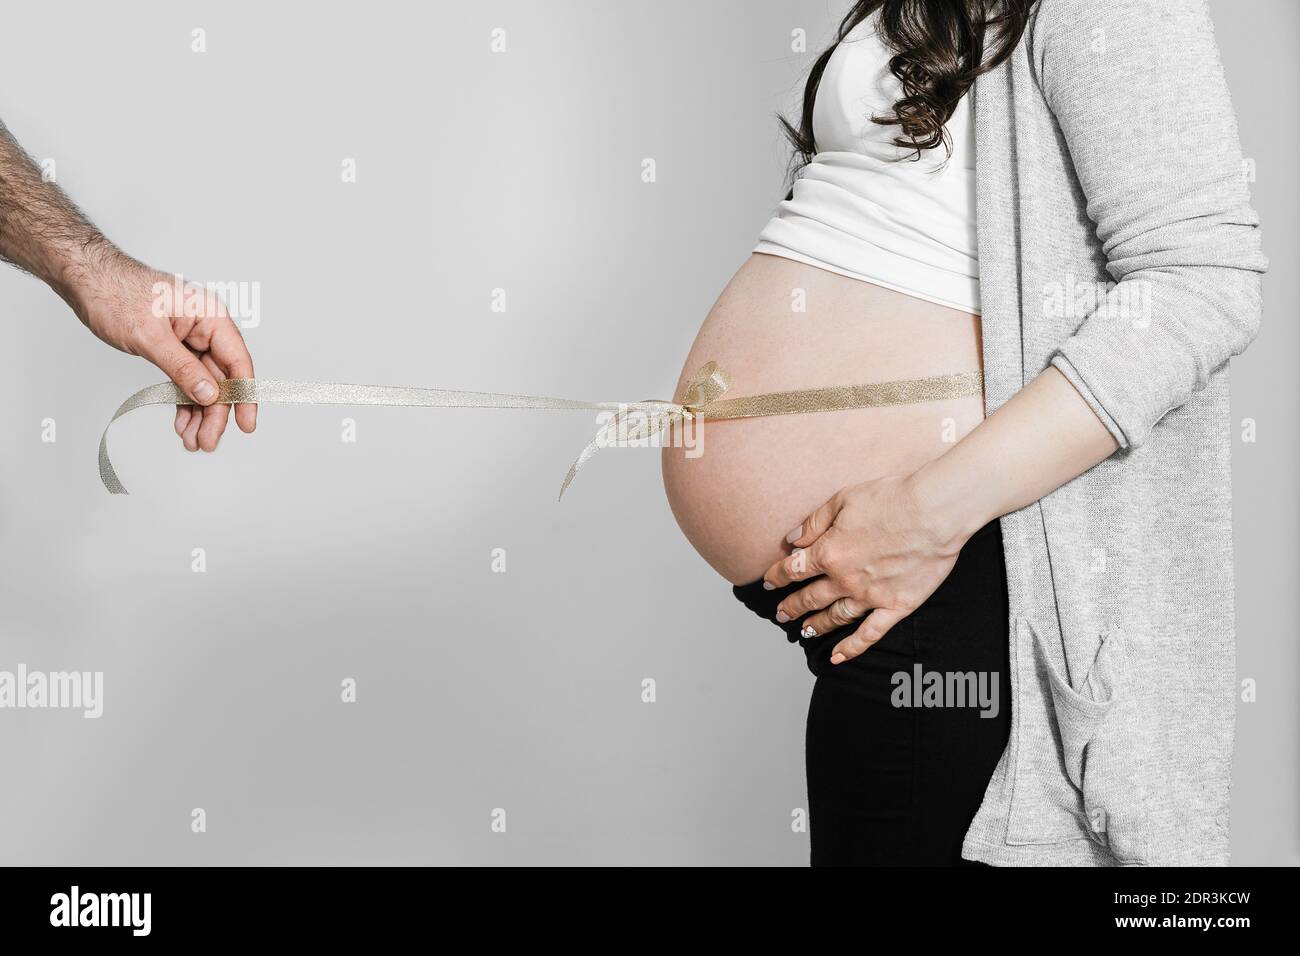 Cropped Hand Of Man Holding Ribbon Tied Up To Pregnant Woman Stomach  Against Wall Stock Photo - Alamy